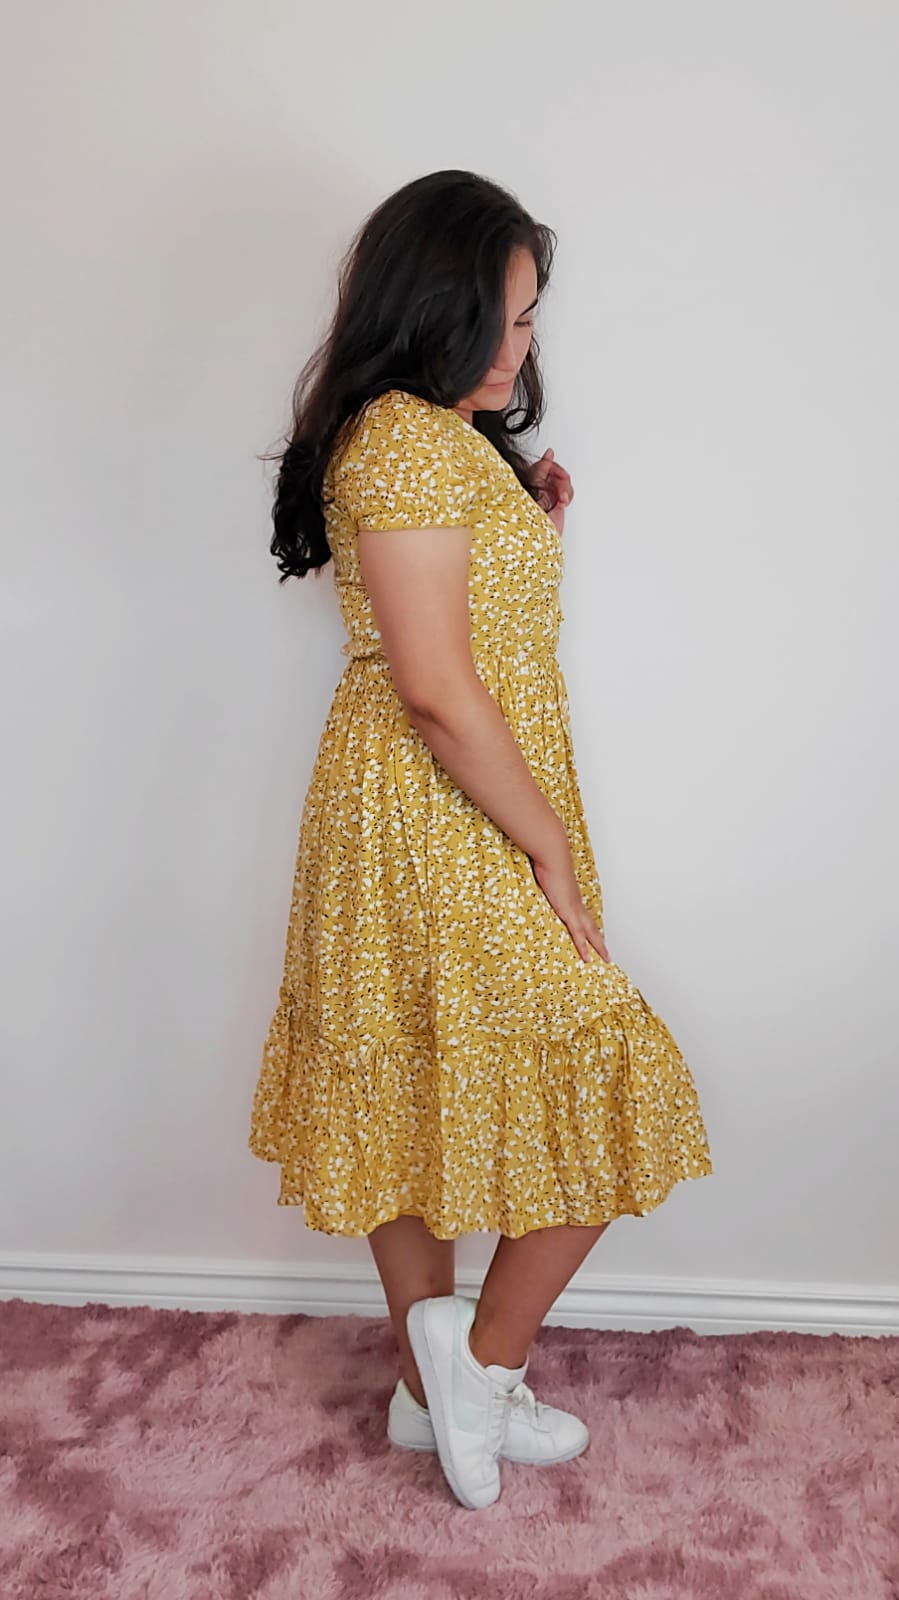 Shein Ditsy Floral Button Front Frill Ruffle Hem Dress - Yellow Midi Dress - Modest OOTD - Modest Outfit Idea - Dress with White Sneakers - Christian and Catholic Modesty